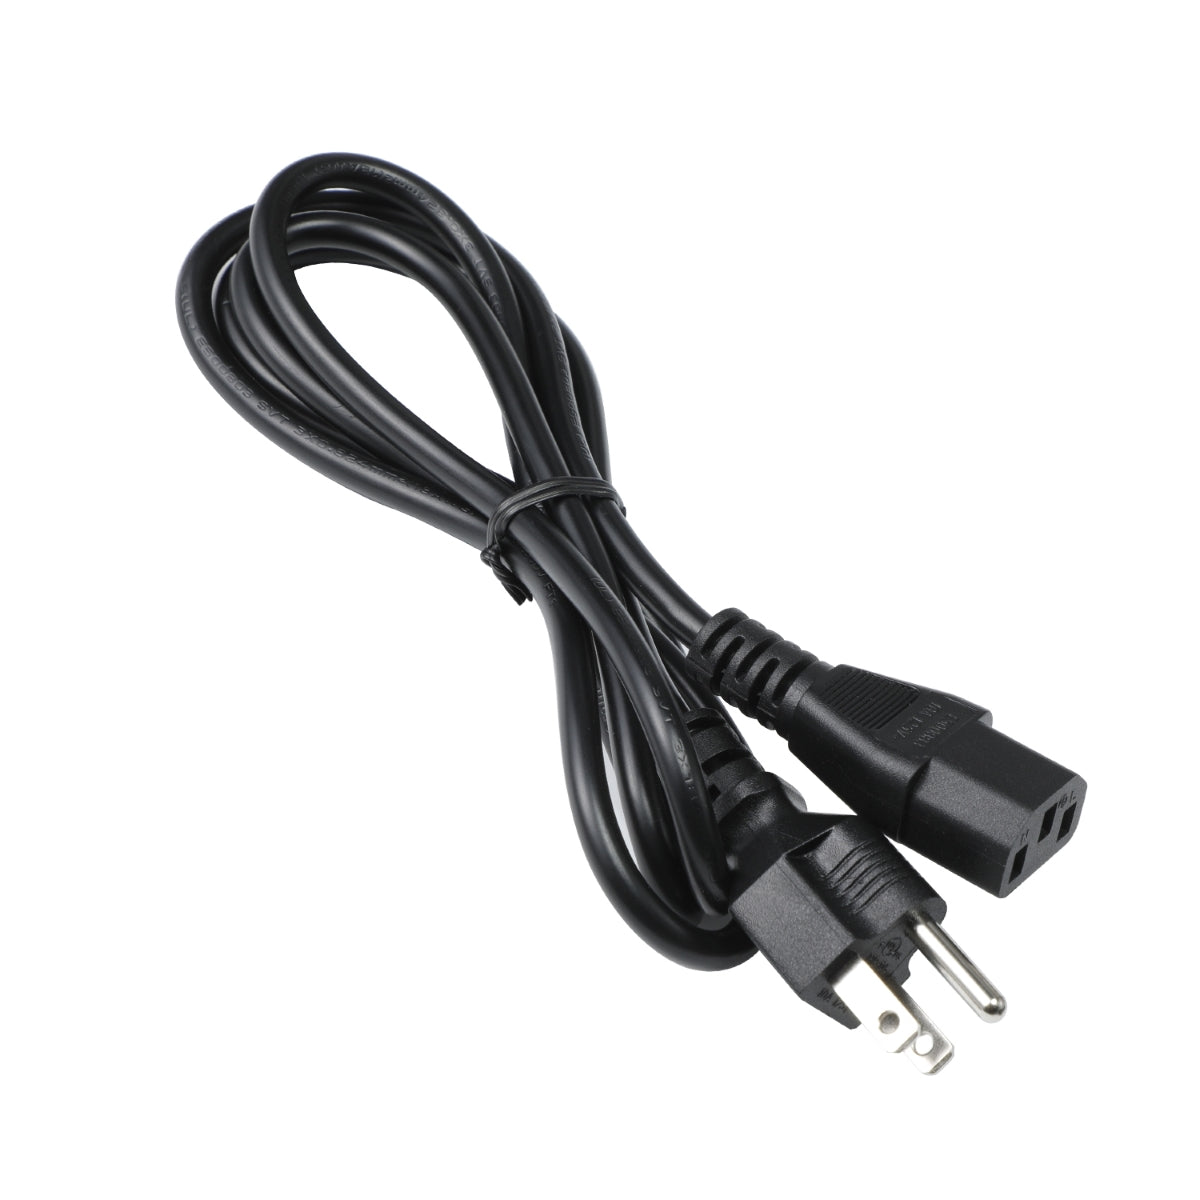 Power Cord for Acer CB271HU Monitor.